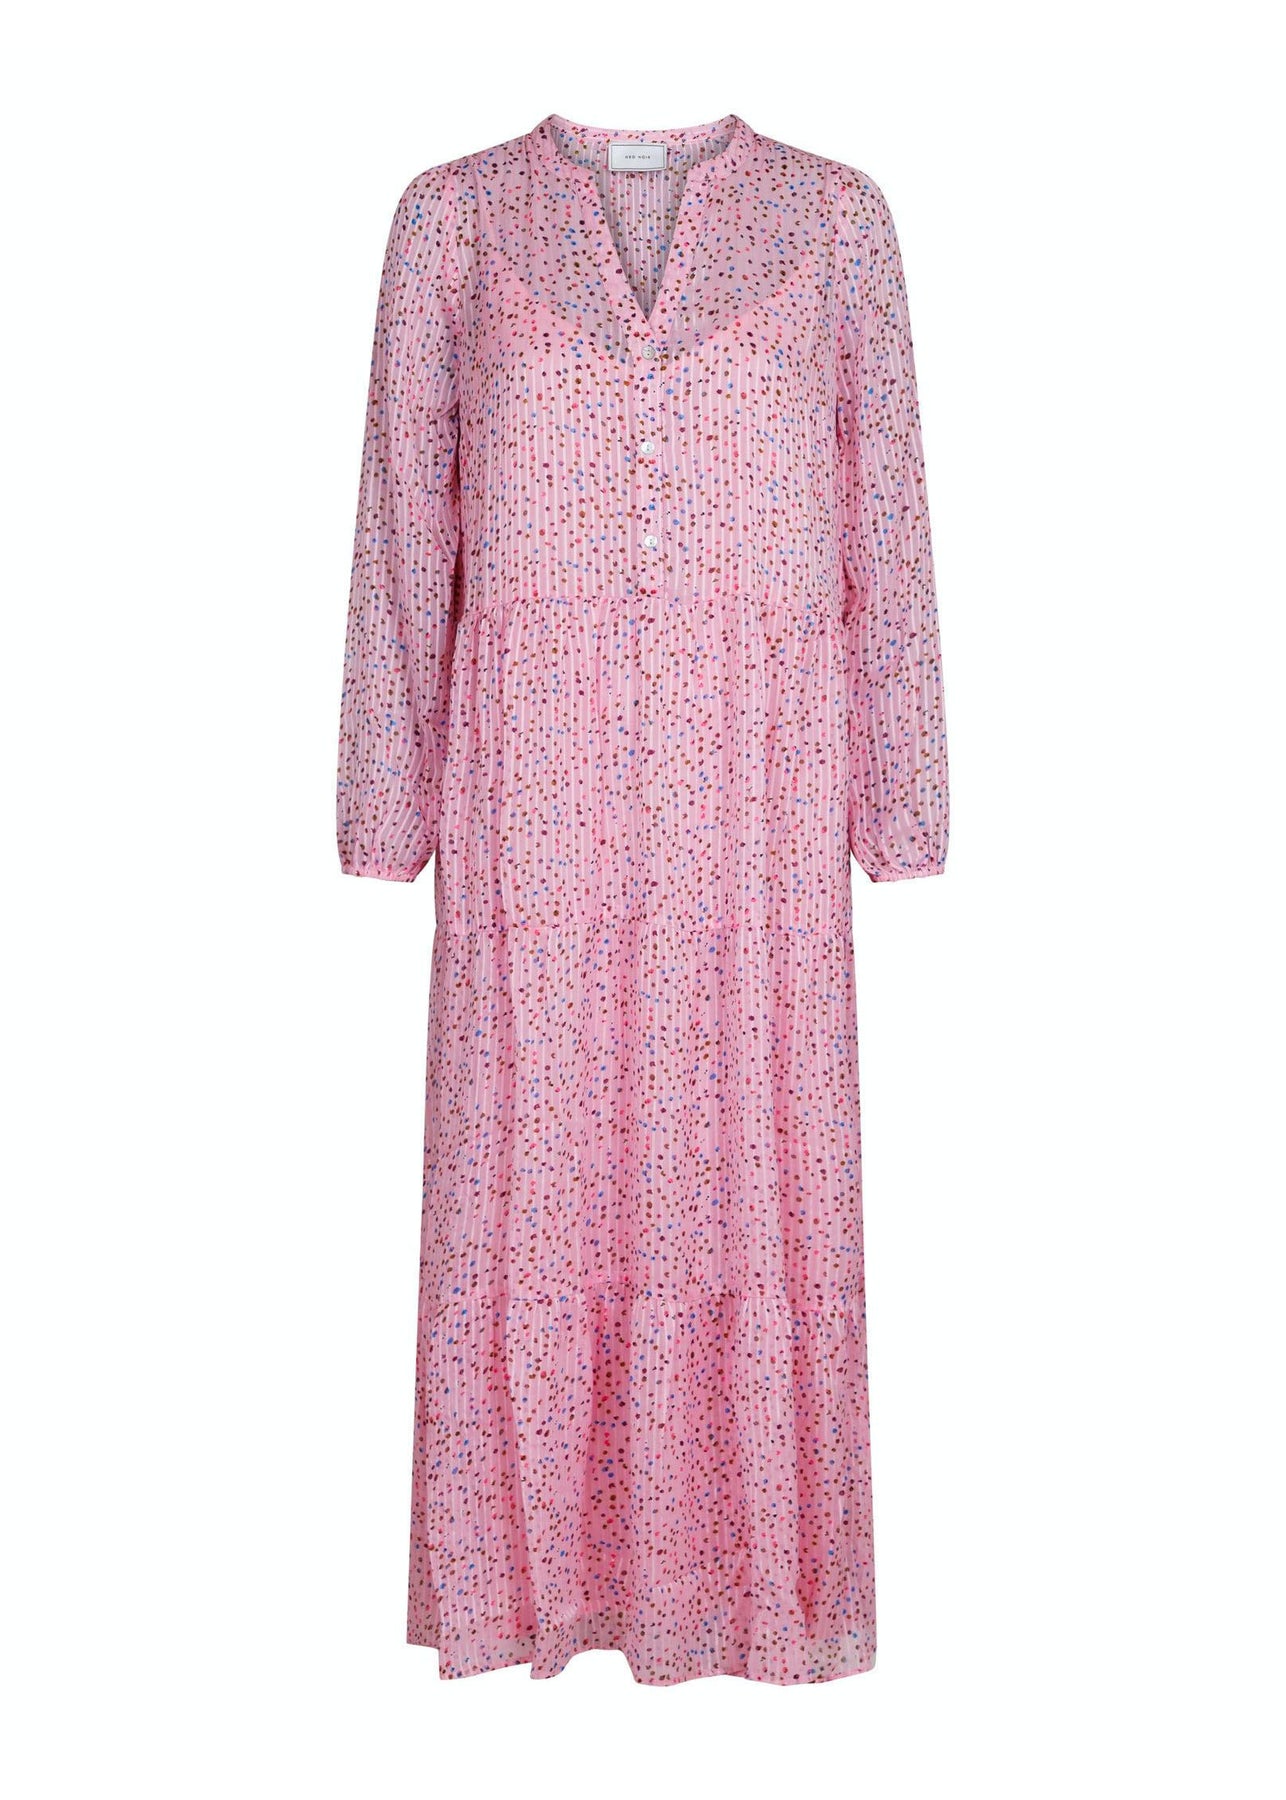 Foresee Blive gift forvirring Neo Noir Nobis Sparkle Dress pink – EDIE